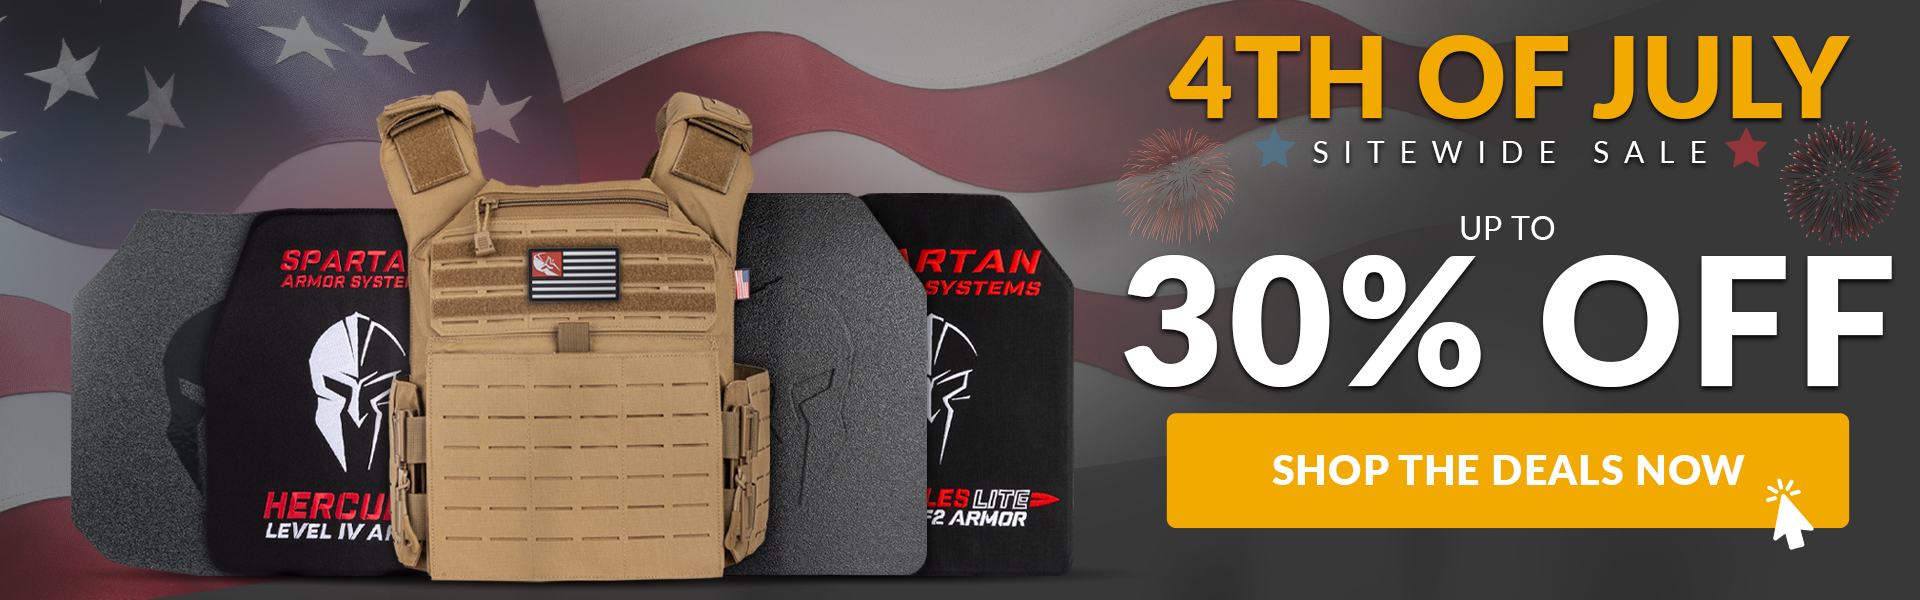 4th of July Sale - Up to 30% Off Sitwide